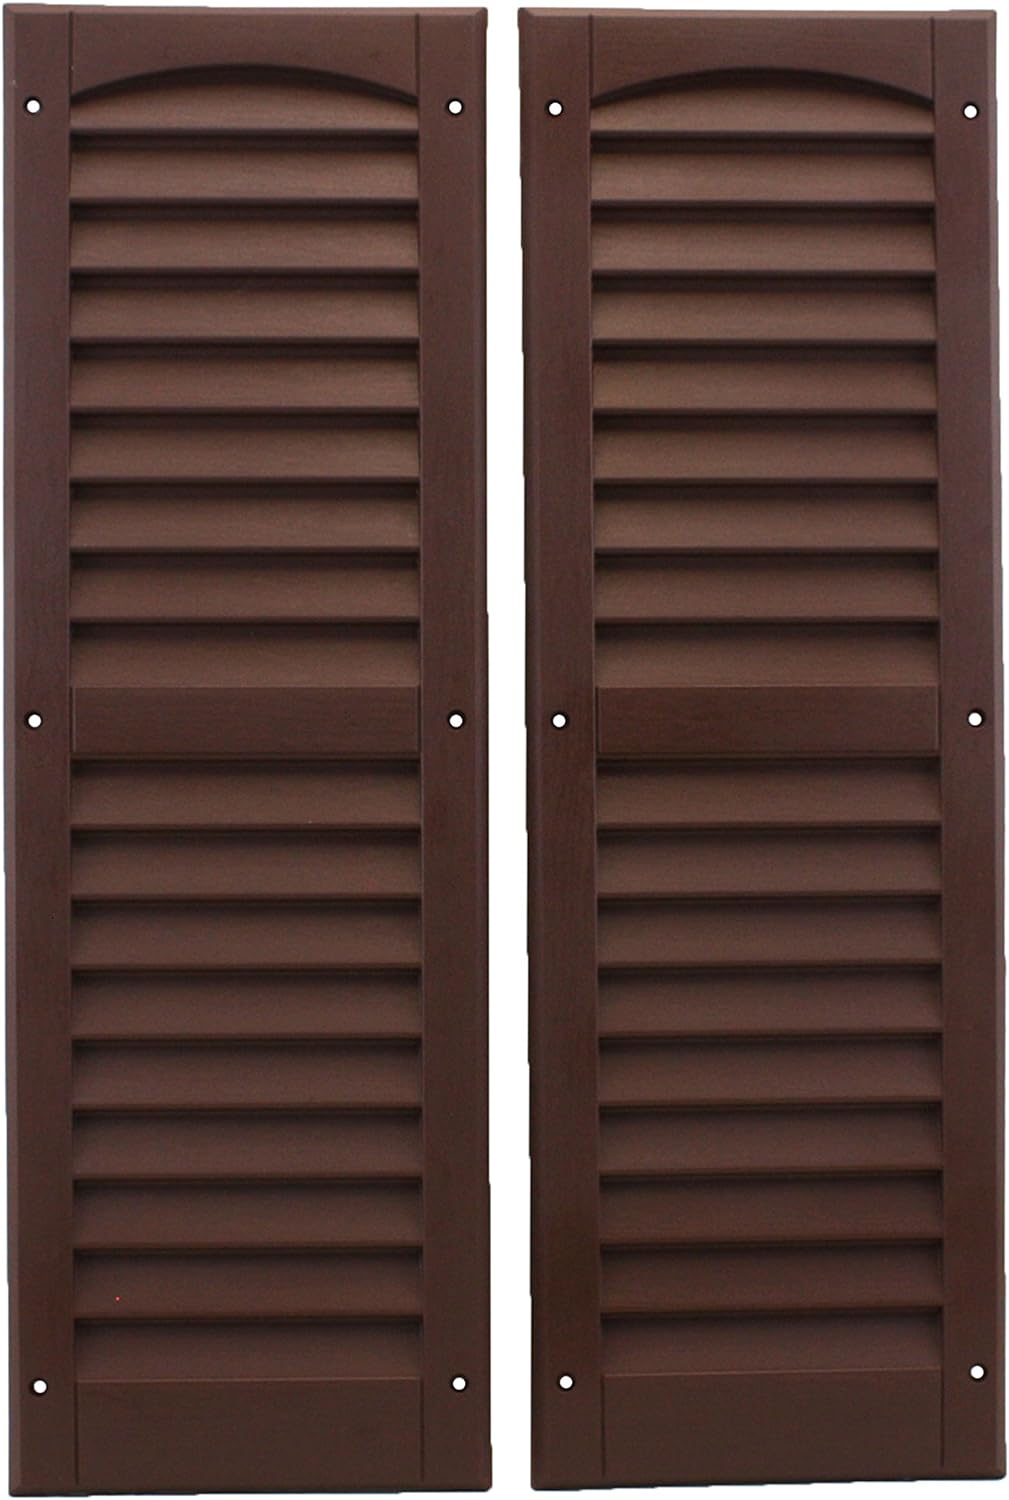 Shed WIndows and More Louvered Shed Shutter or Playhouse Shutter, Brown 9" X 27", 1 Pair